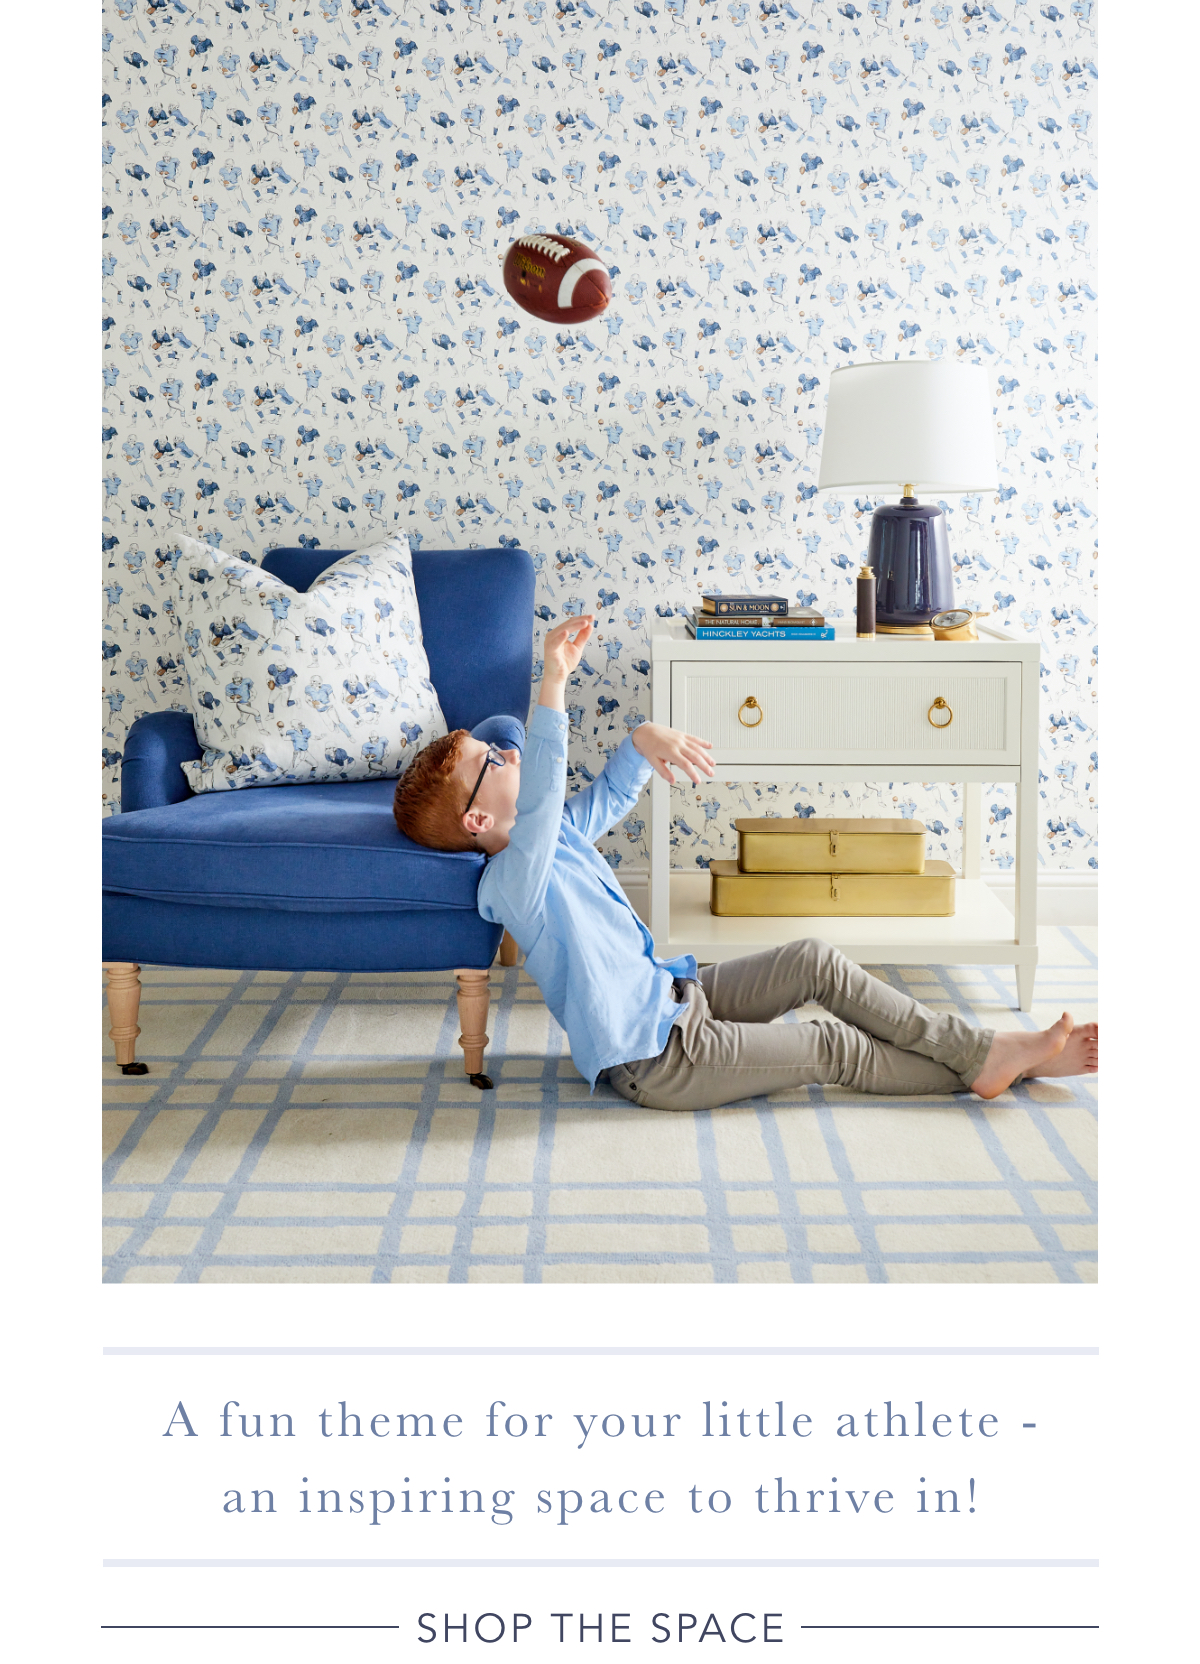 A fun theme for your little athlete - an inspiring space to thrive in!